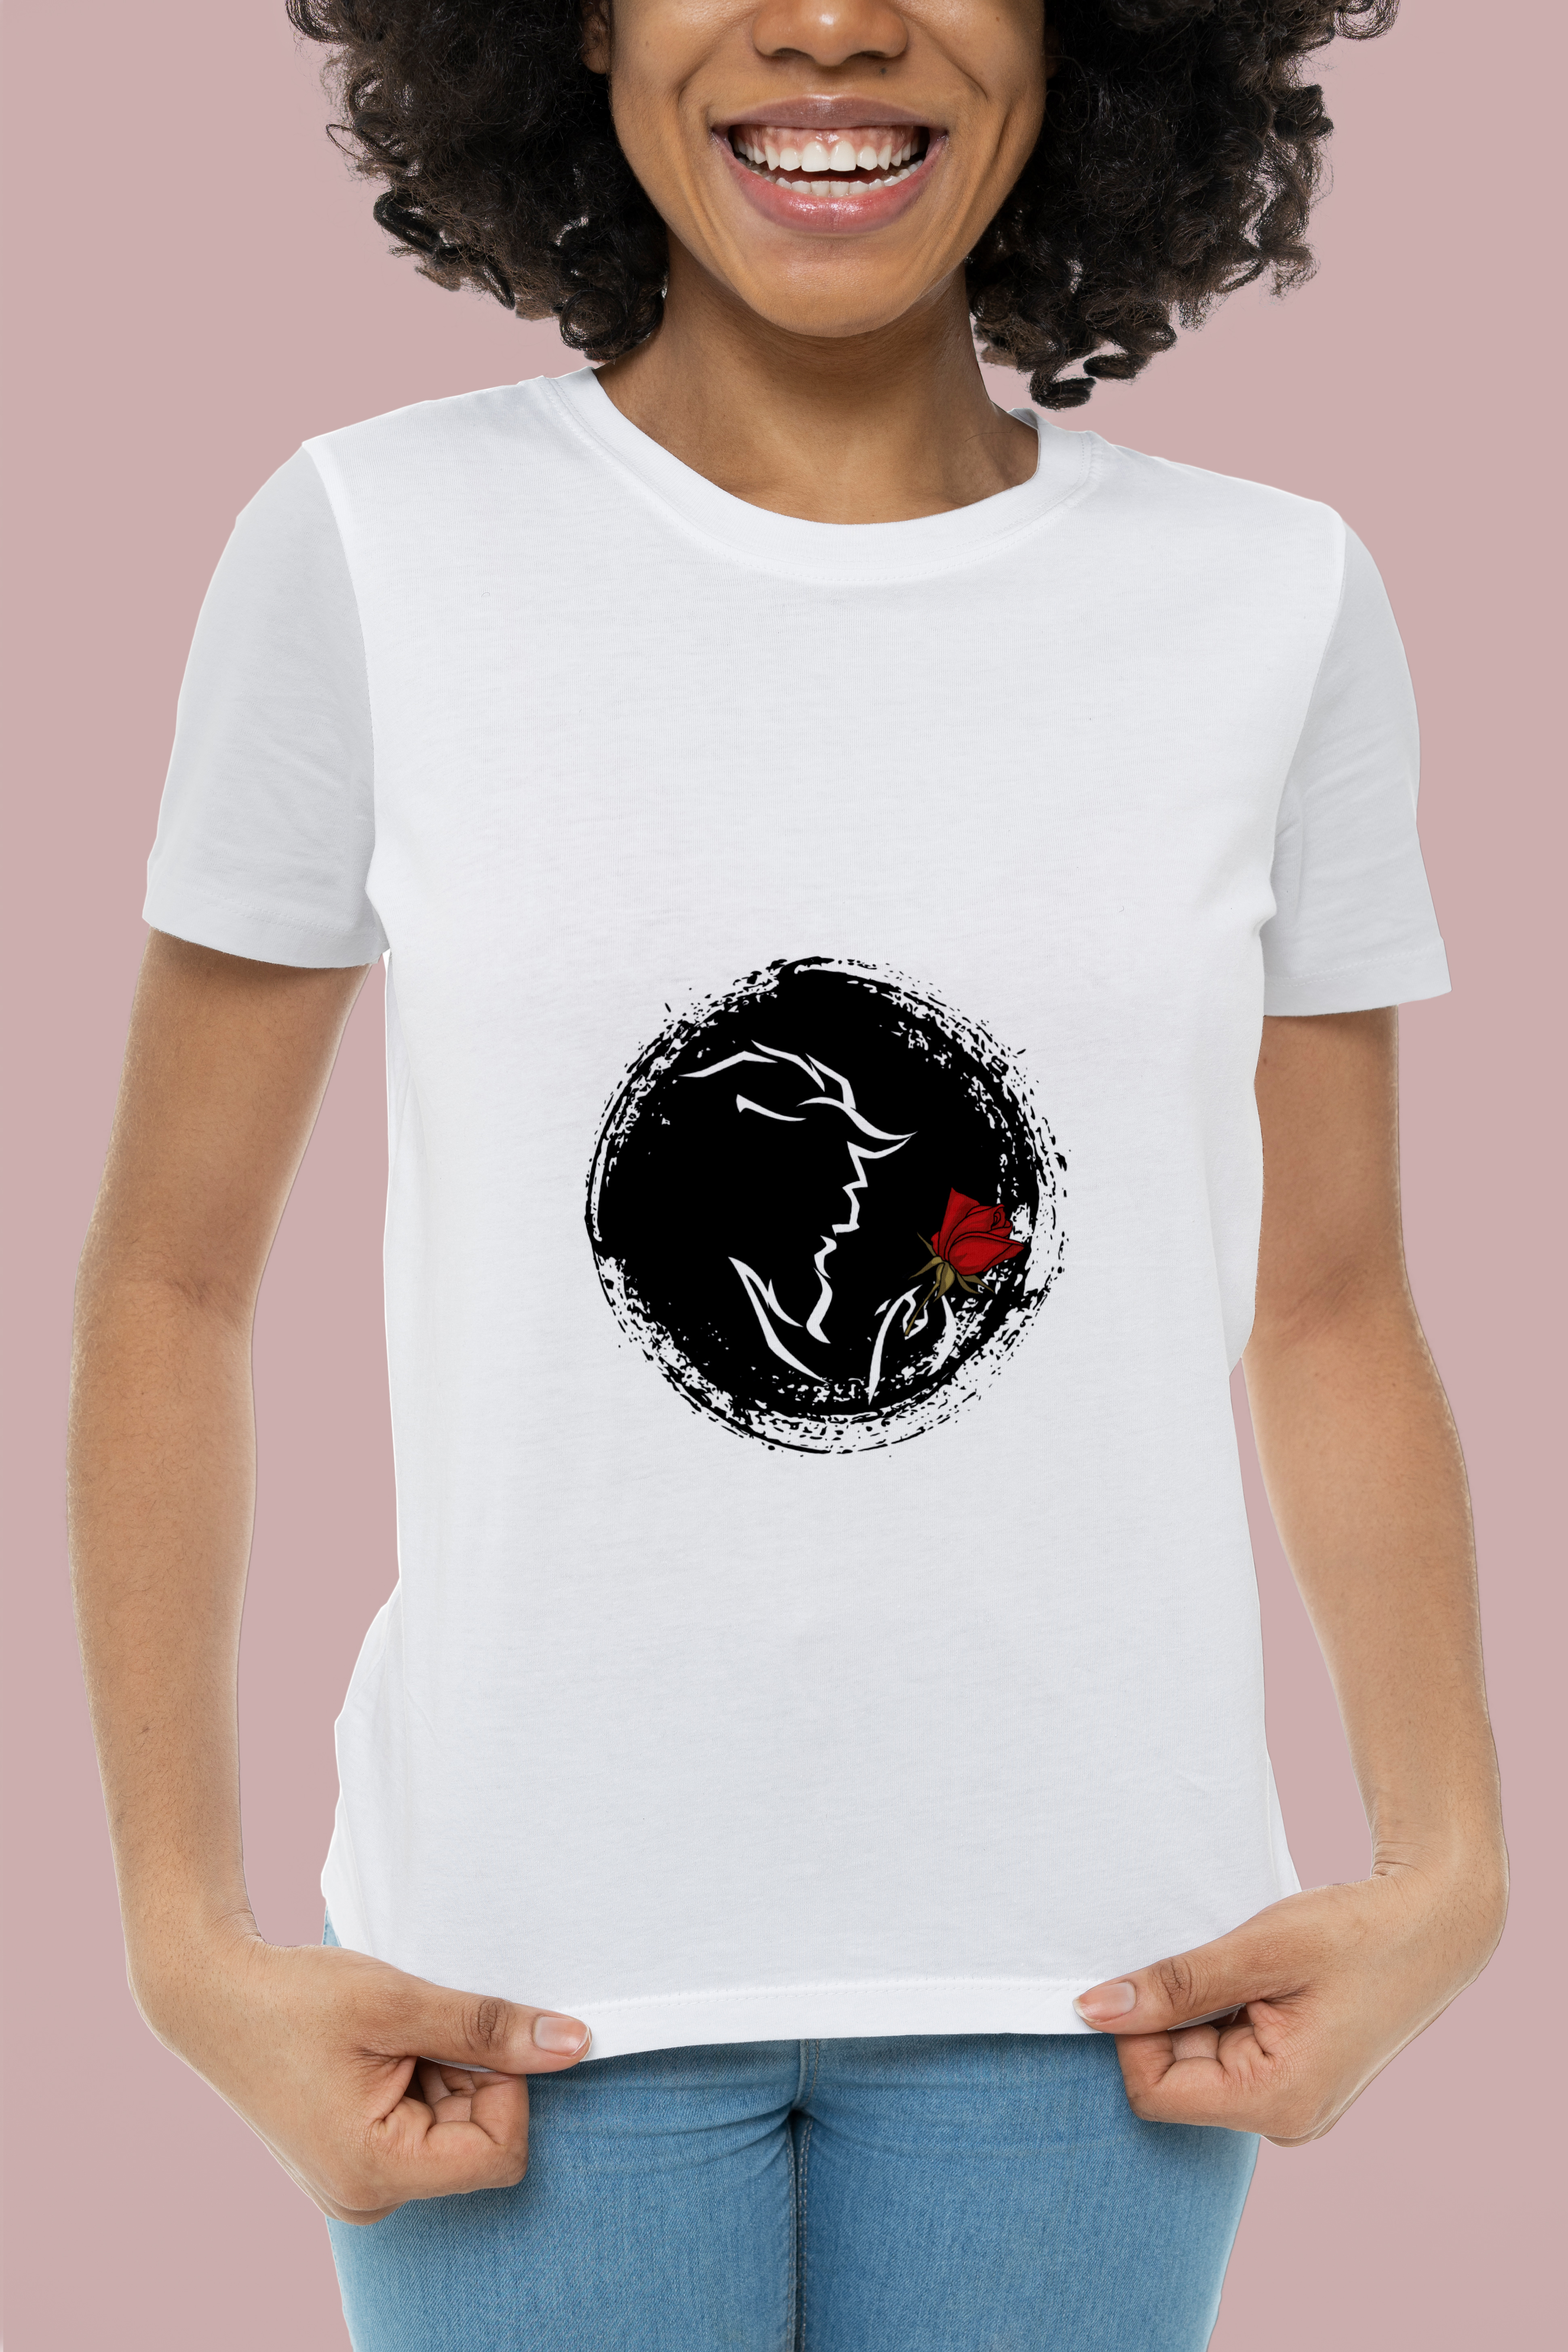 Black logo with a rose.